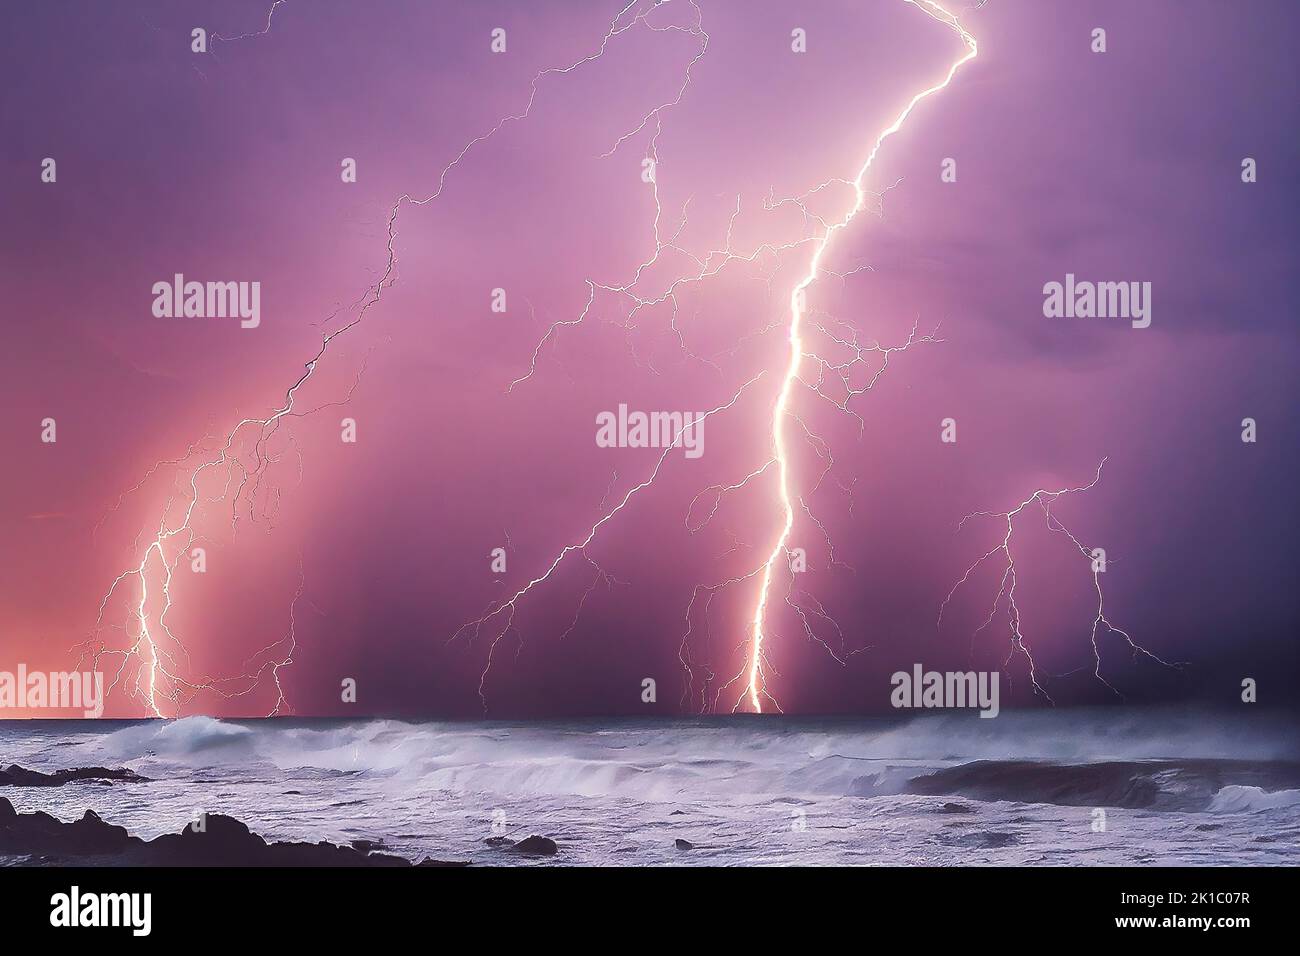 A storm with dangerous lightning strikes in a cloudy sky and stormy ocean is pictured in a natural disaster caused by climate change. 3D illustration Stock Photo